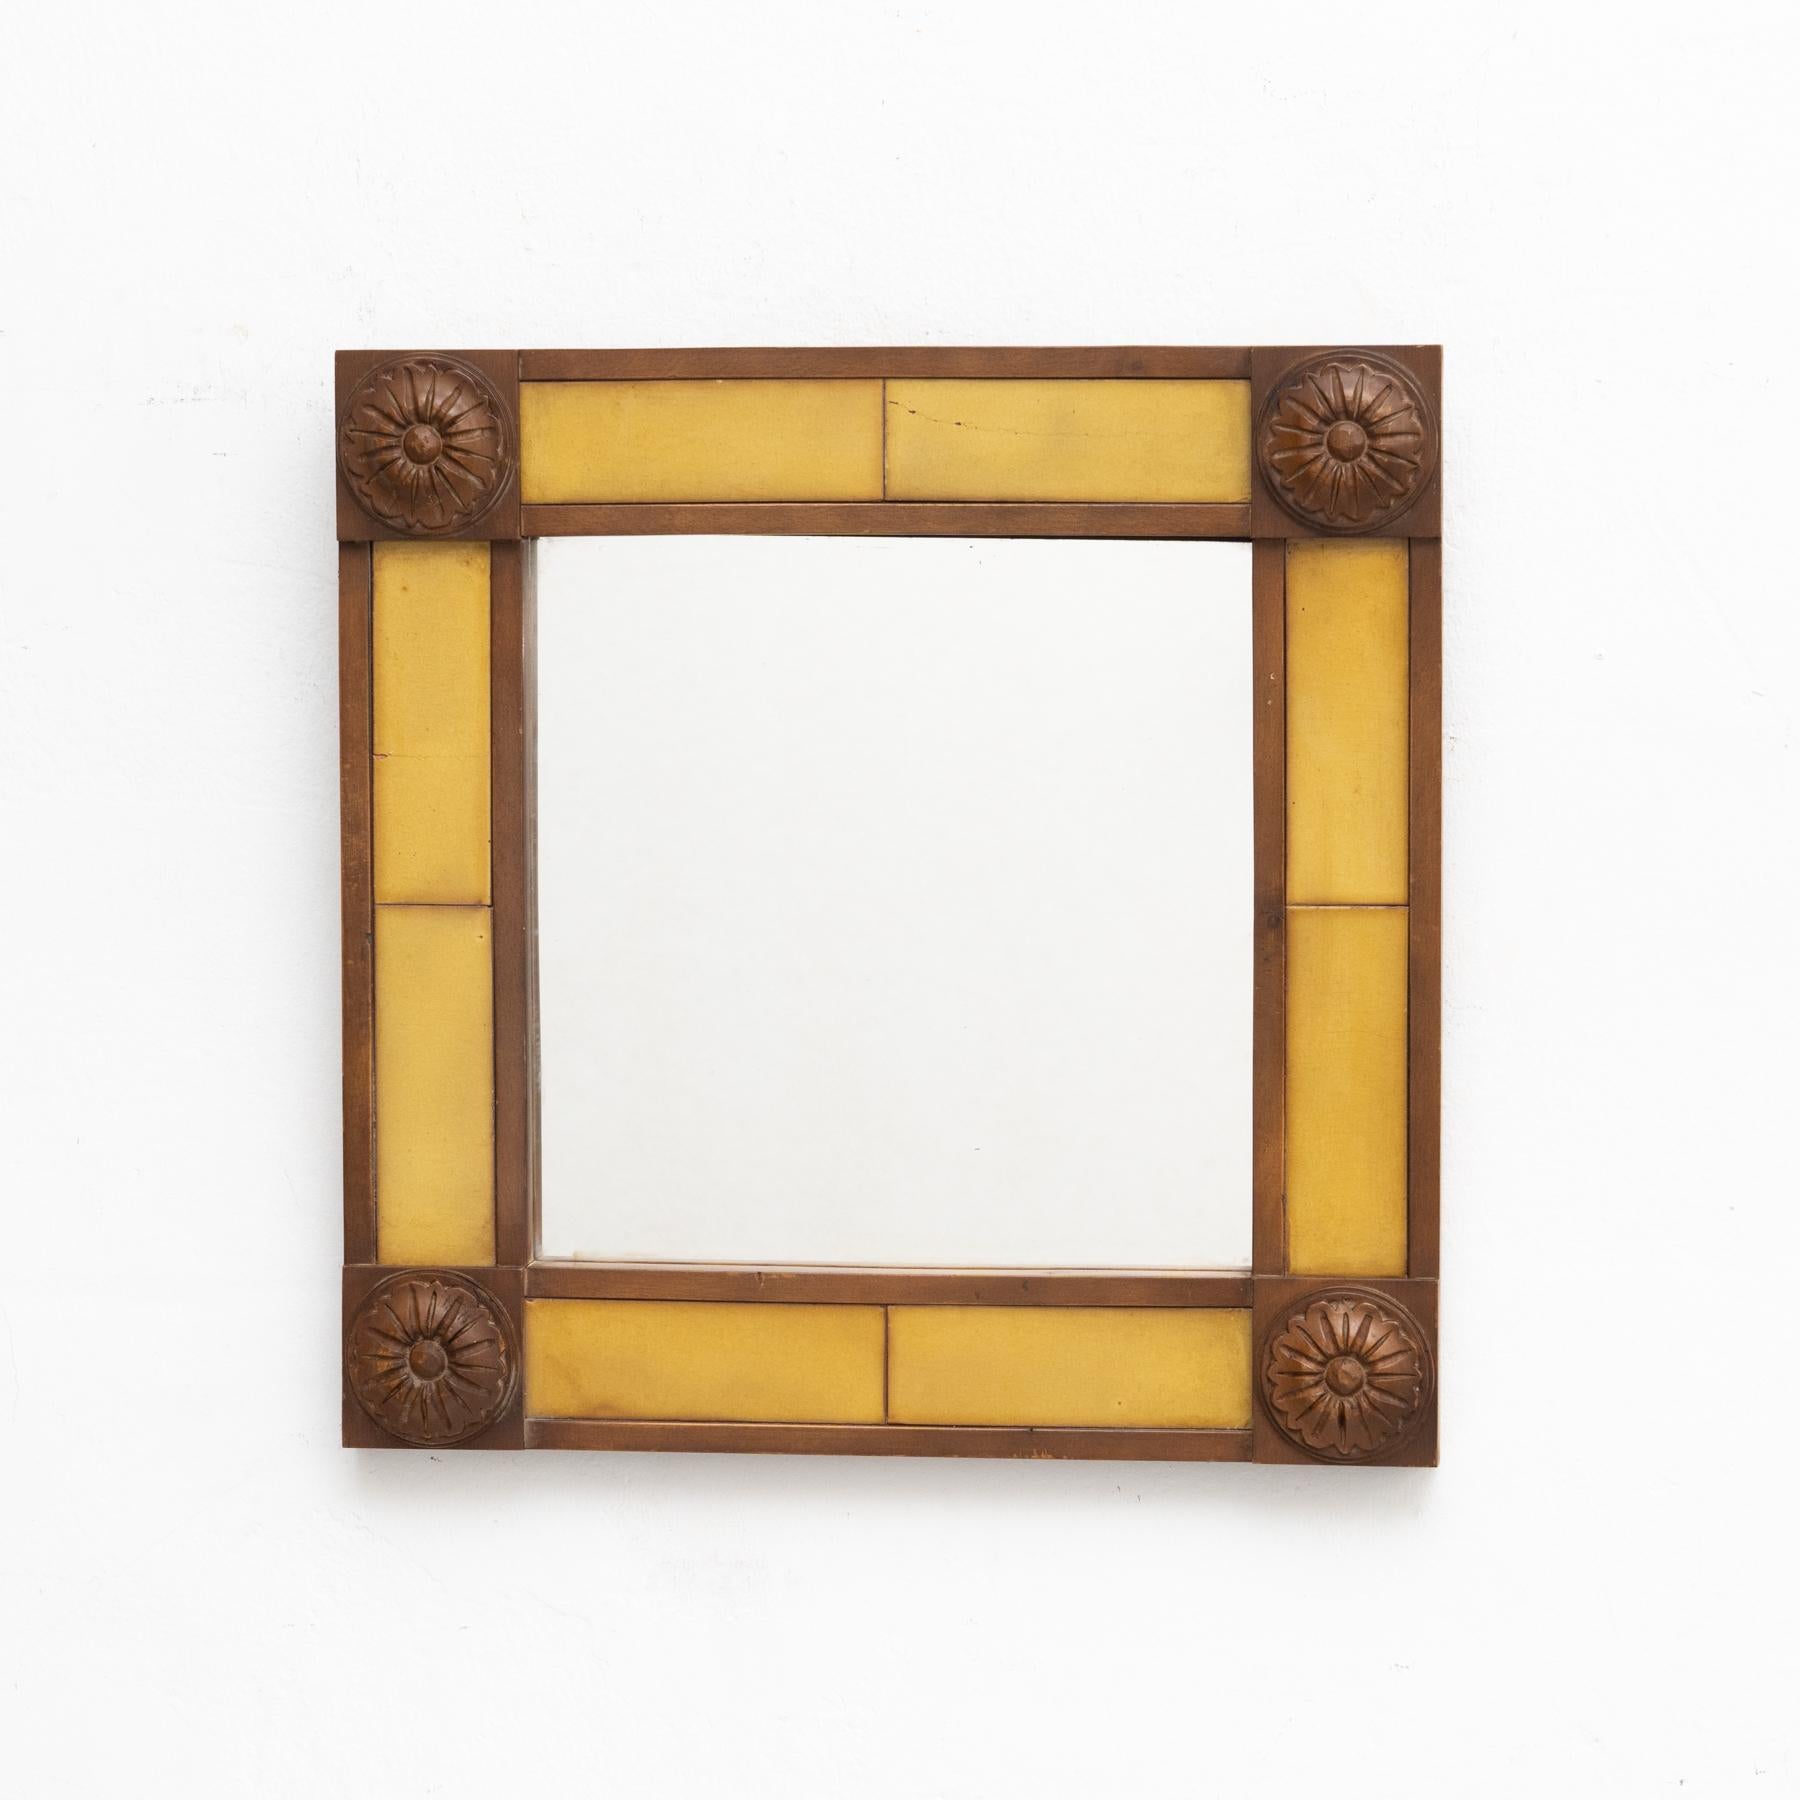 Antique Spanish handcrafted hand carved wood and tile mirror.

Manufactured by unknown designer in Spain, circa 1940

In original condition, with minor wear consistent of age and use, preserving a beautiful